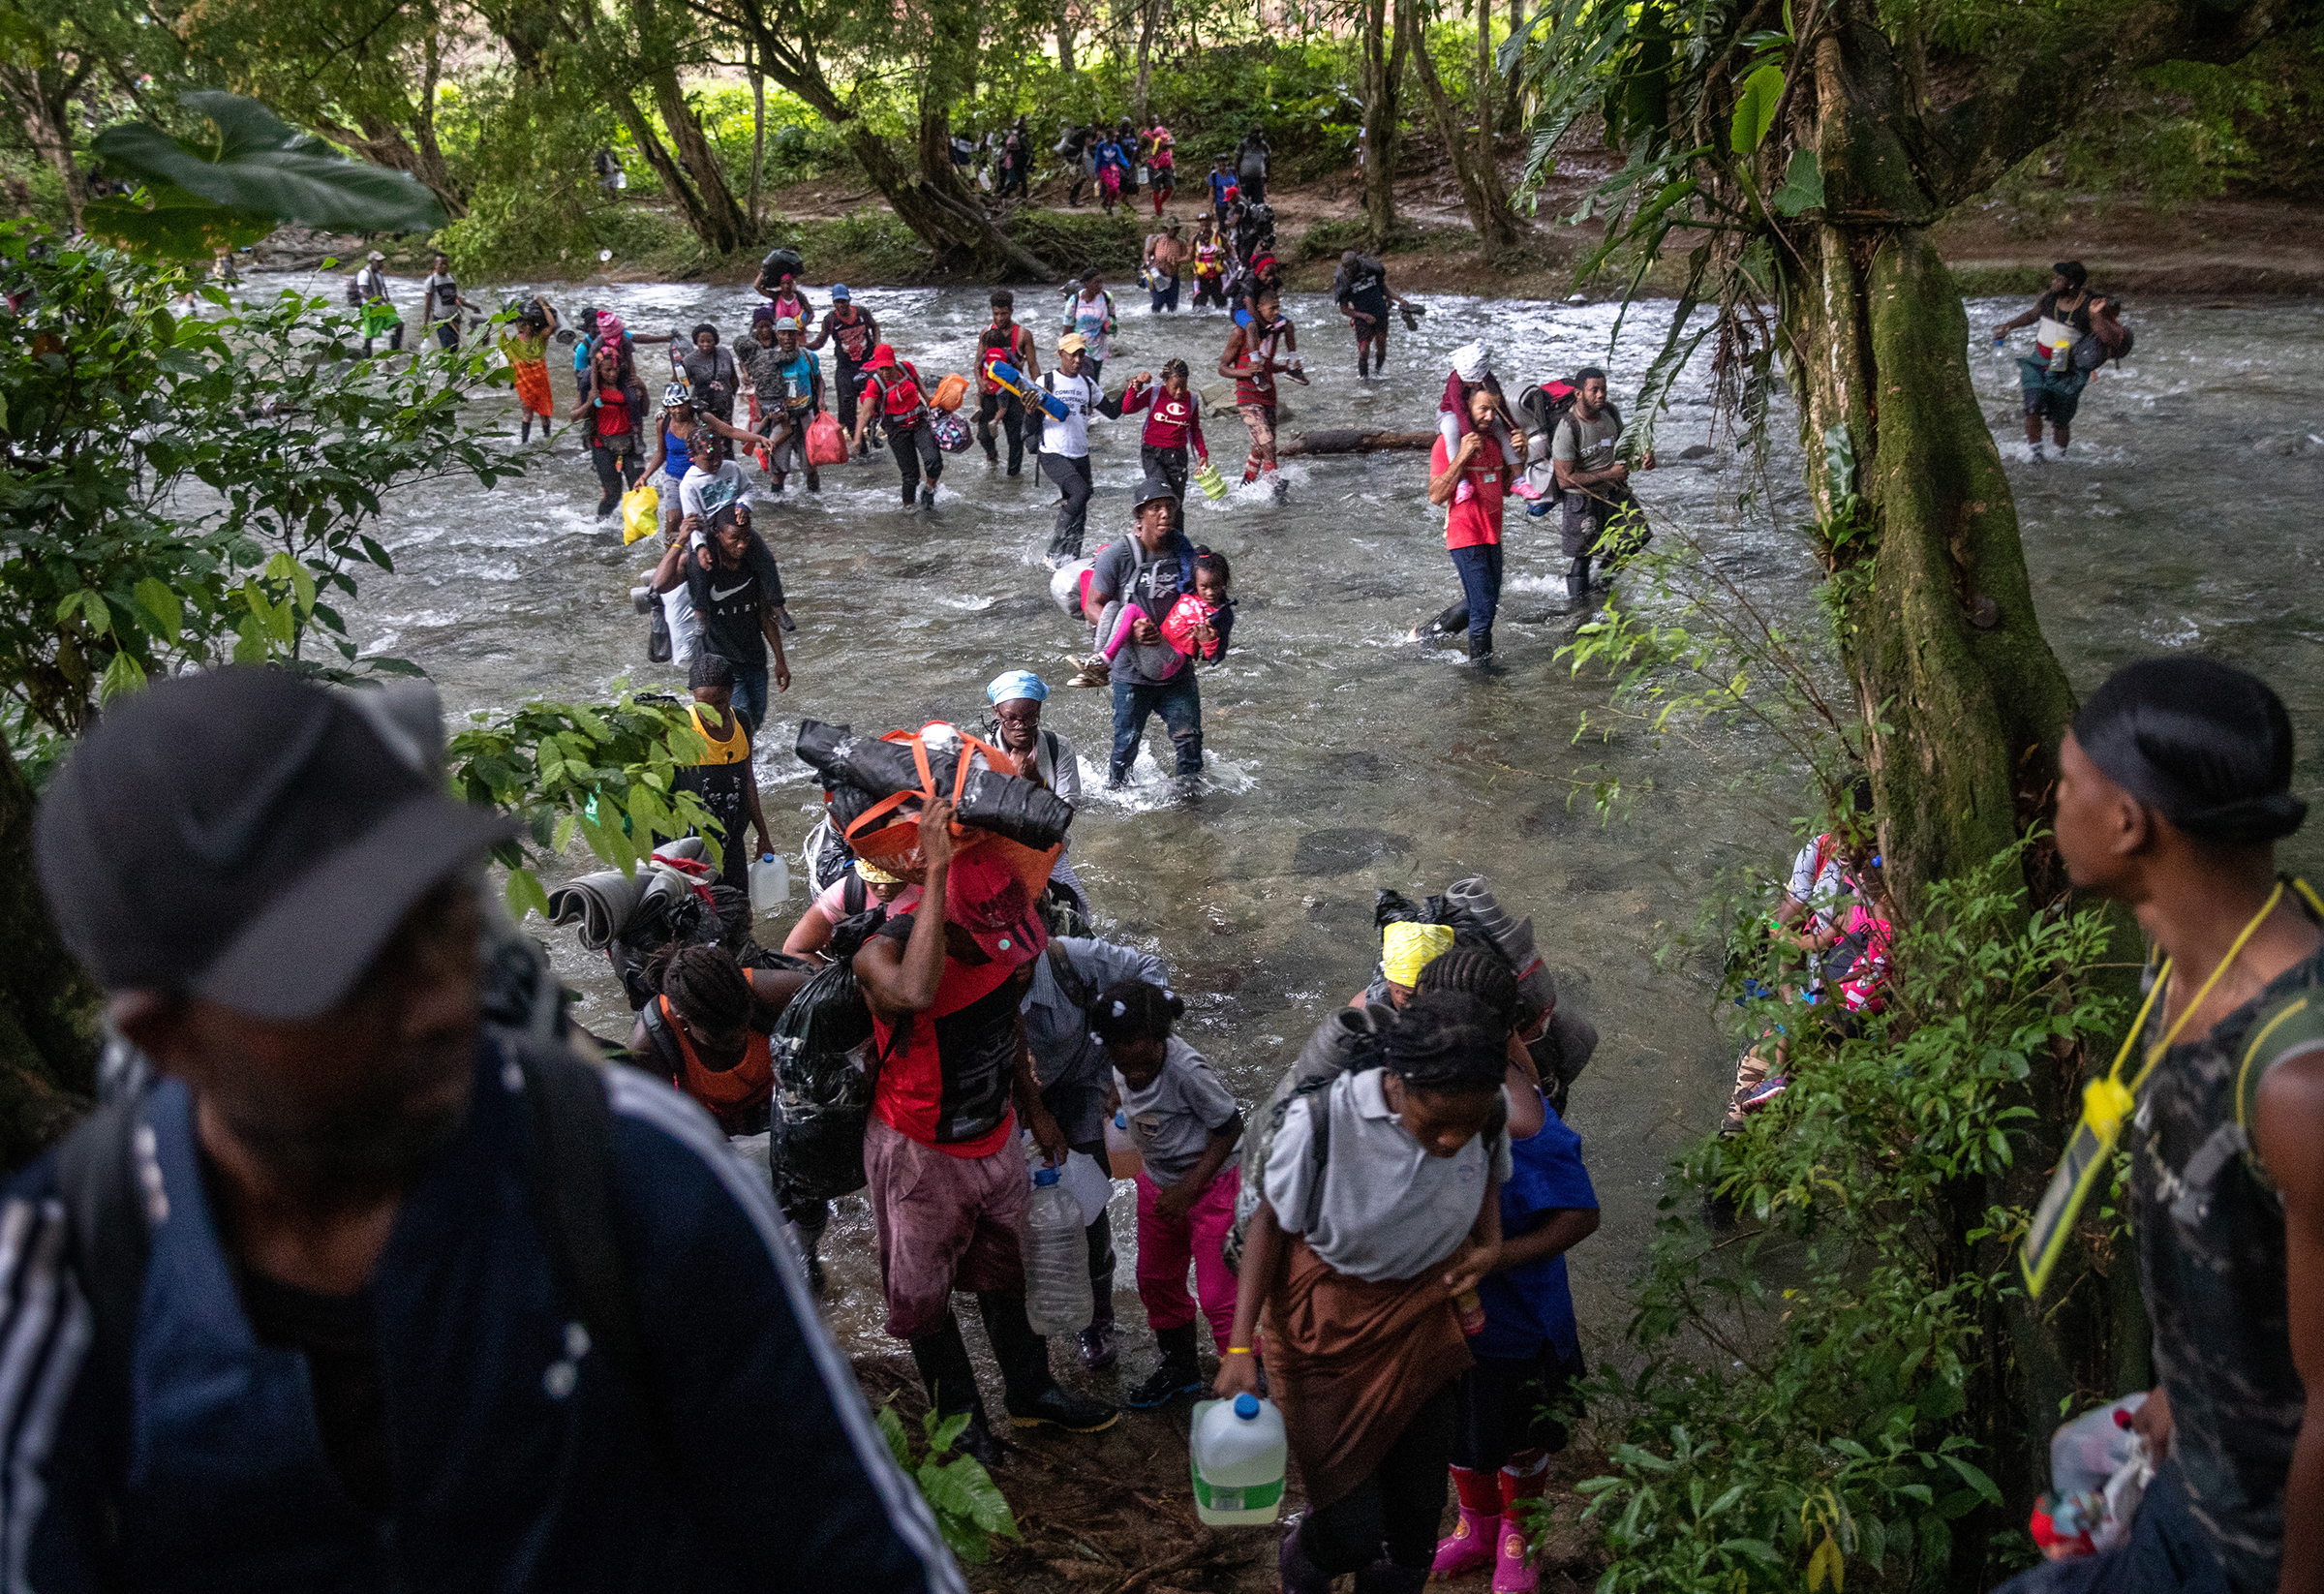 Families, mostly from Haiti, make one of dozens of river crossings on the first day of their trek through the Darién Gap in Colombia on Oct. 18. The 66-mile passage through dense rainforest and mountains is considered the most difficult stretch for migrants traveling from South America to the United States. (John Moore—Getty Images)